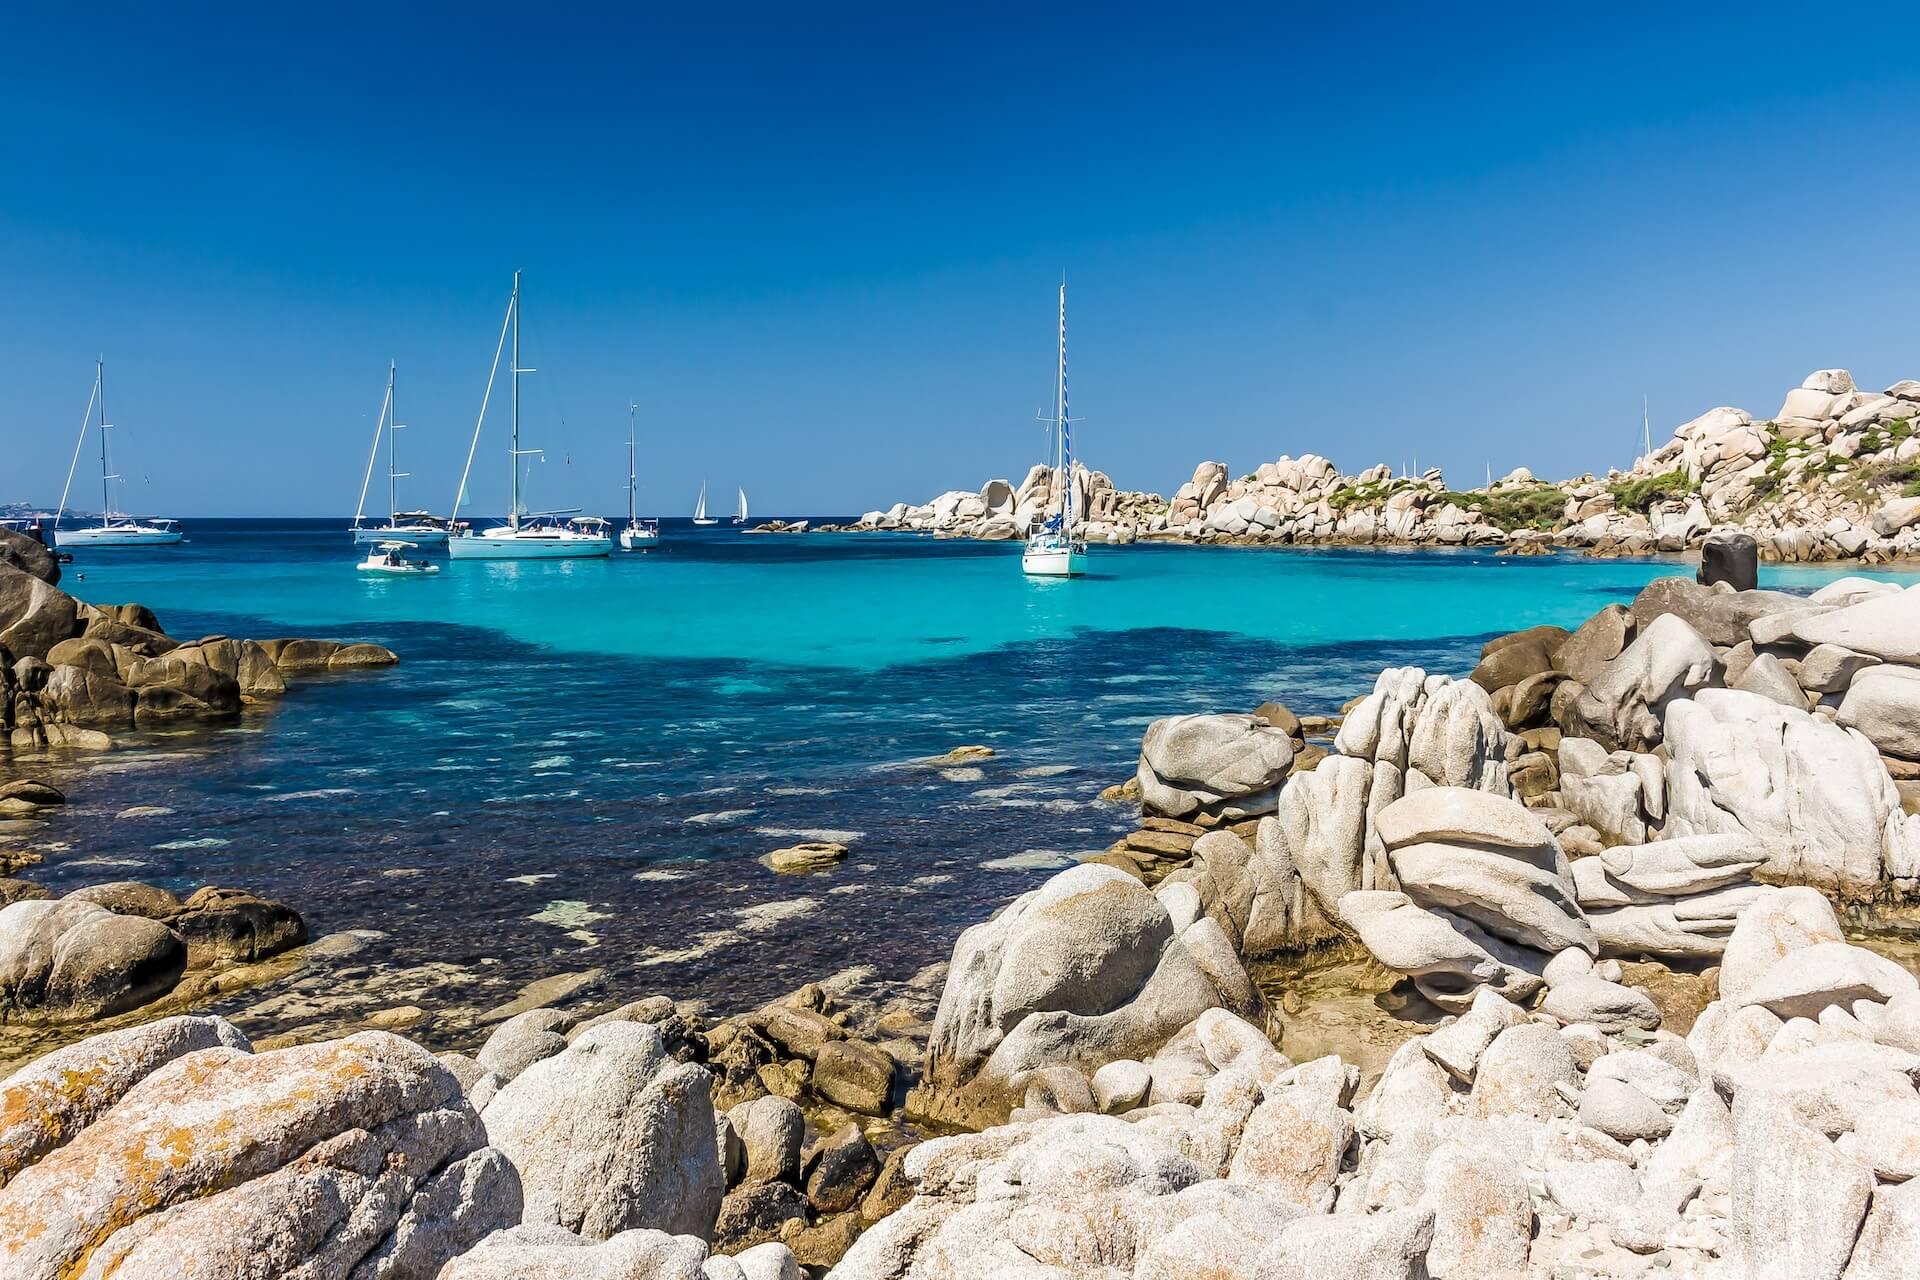 View of a bay and ships in Corsica